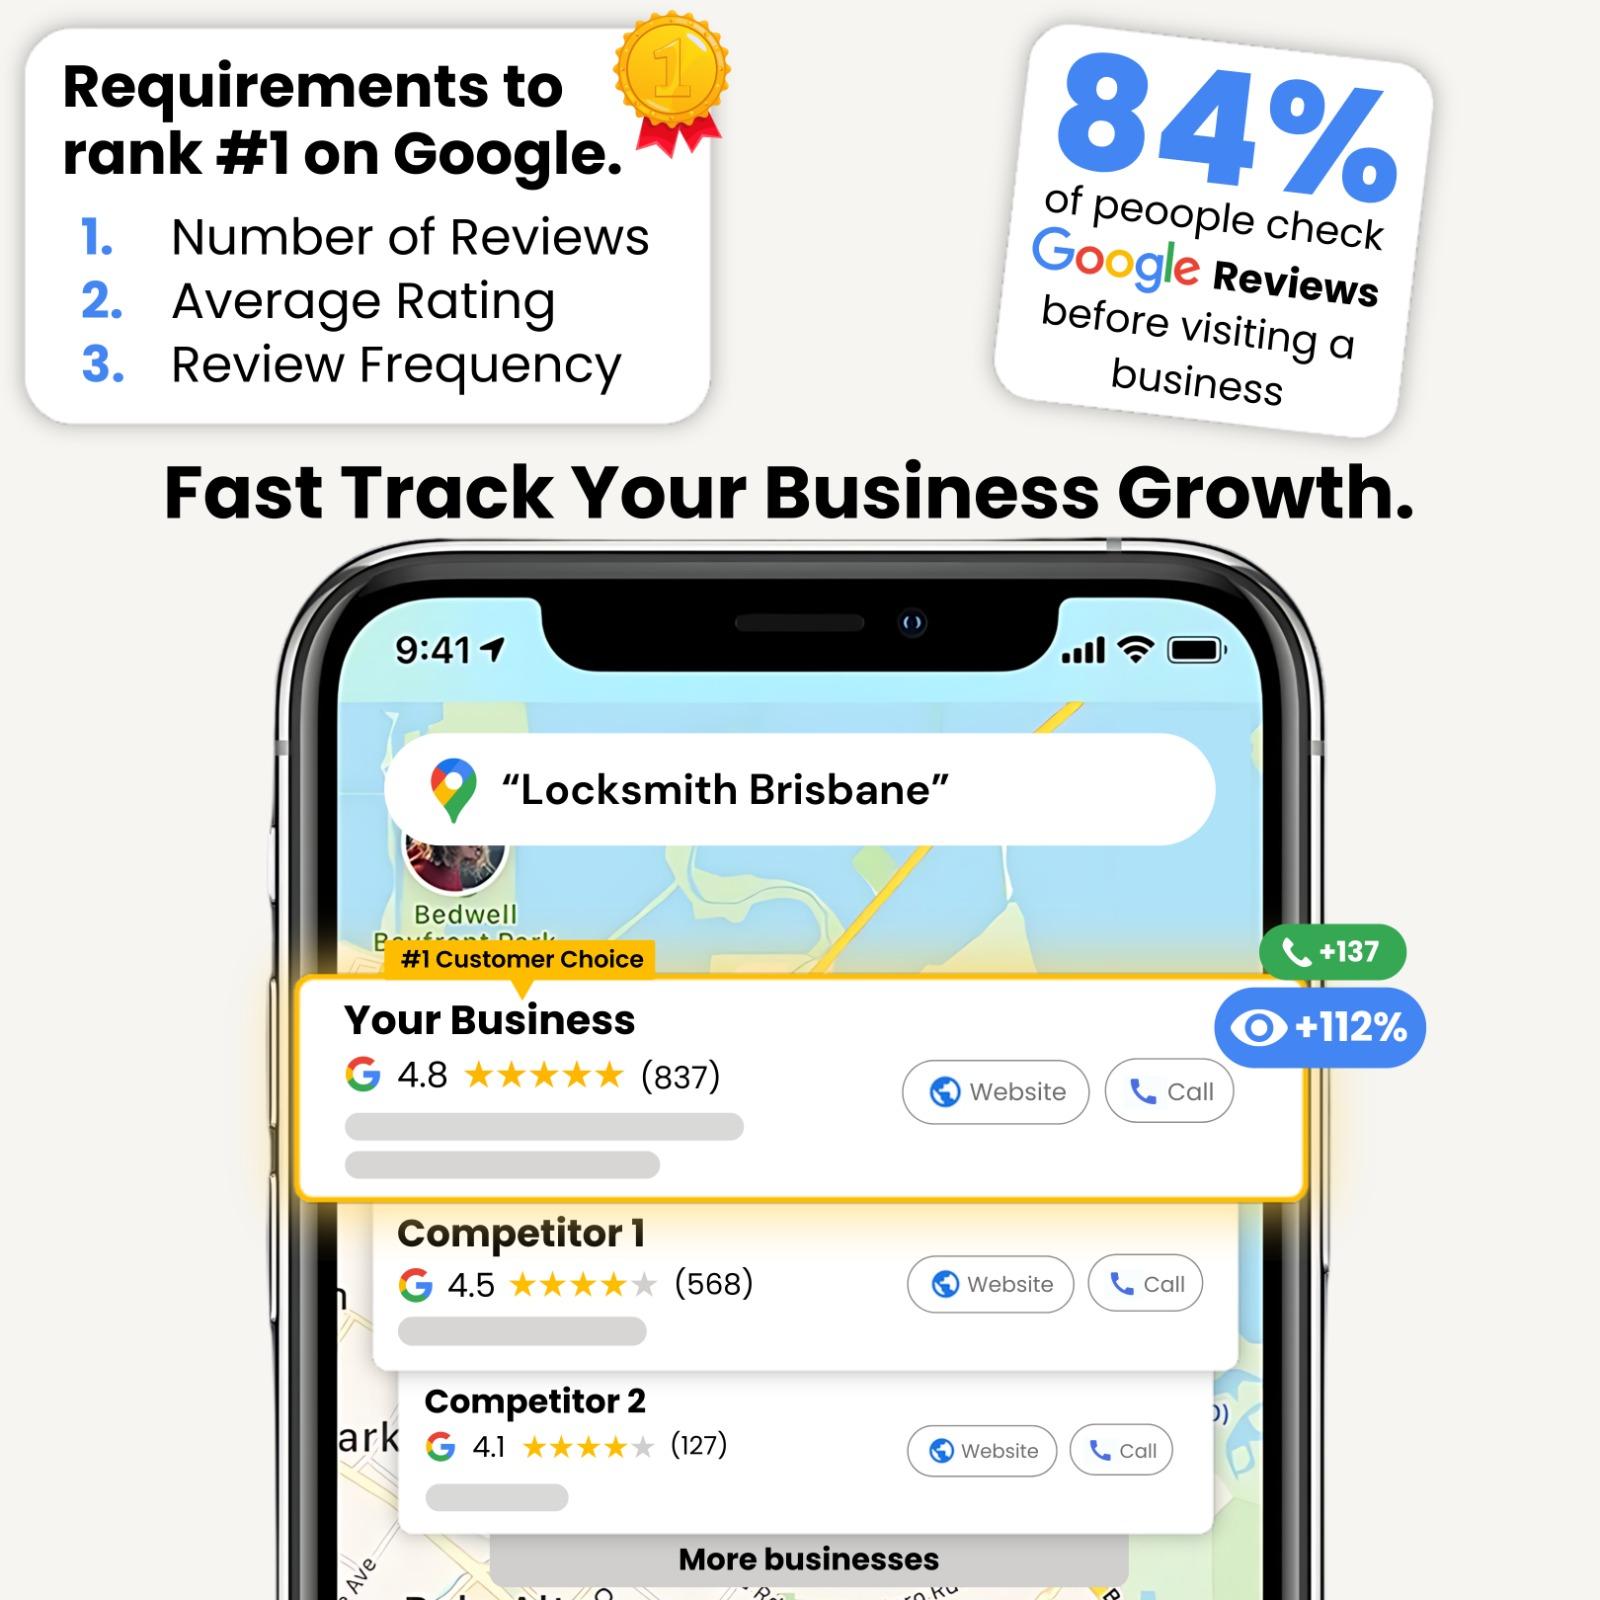 Graphic showing the requirements to rank #1 on Google (number of reviews, average rating, review frequency) and a statistic that 84% of people check Google Reviews before visiting a business, with an example of improved business ranking and growth using ReviewBoost